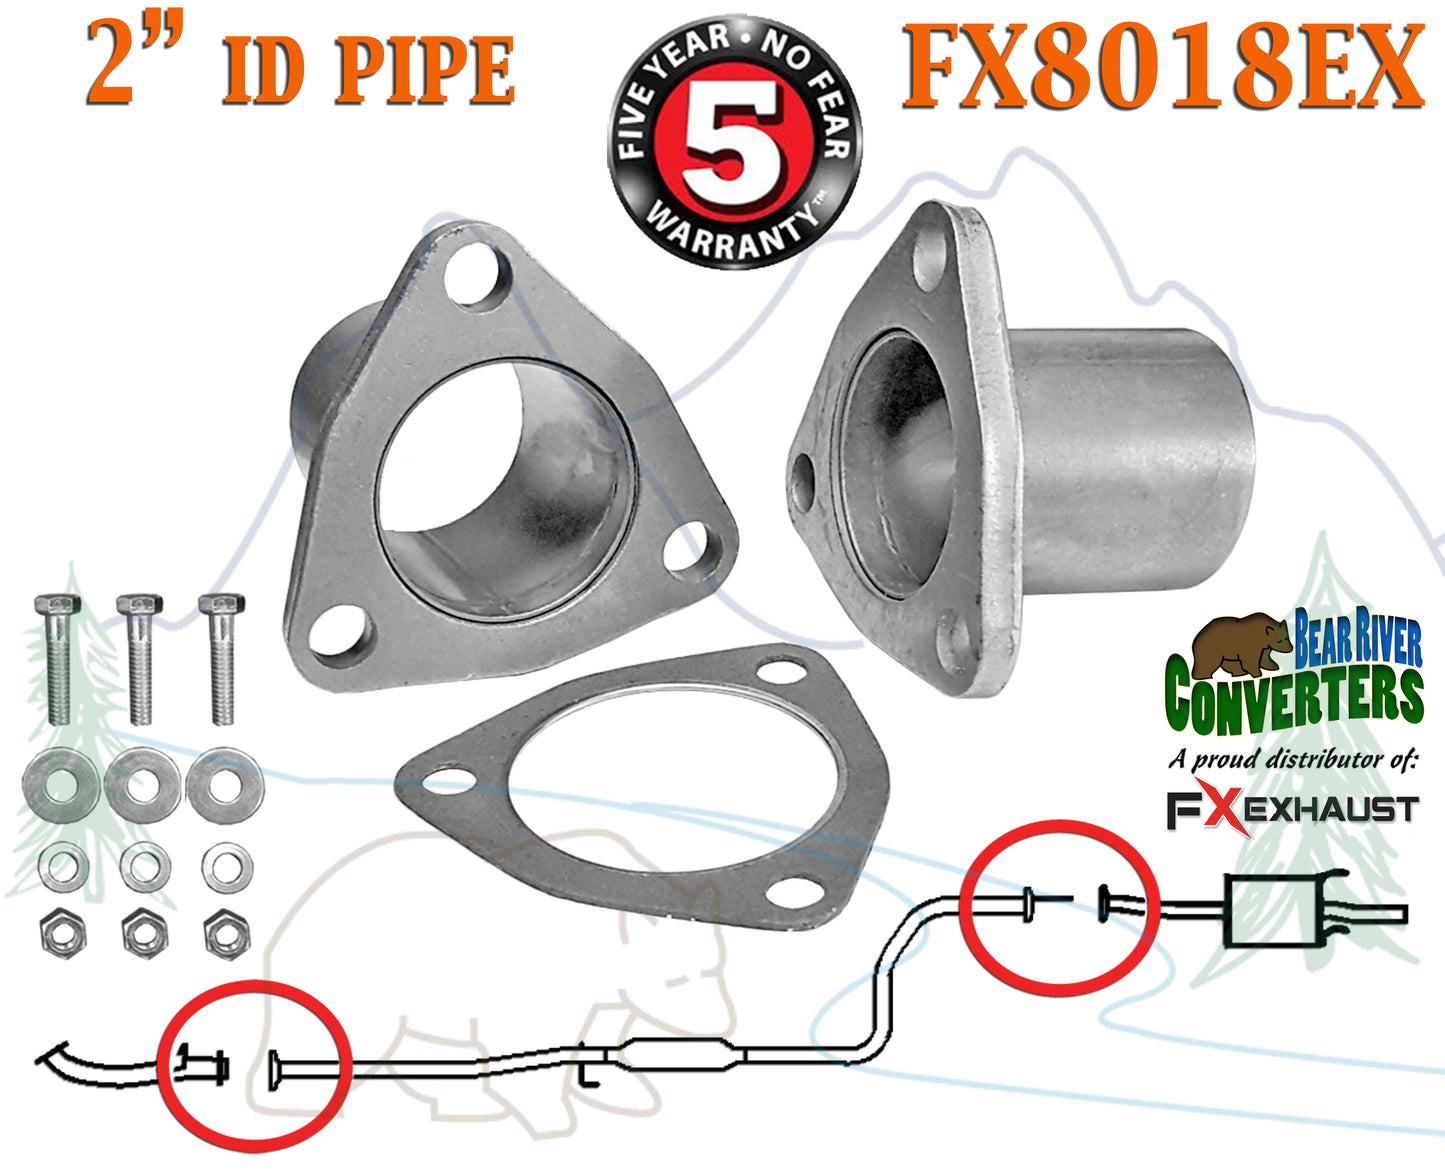 FX8018EX 2" ID Universal QuickFix Exhaust Triangle Flange Repair Pipe Kit Gasket